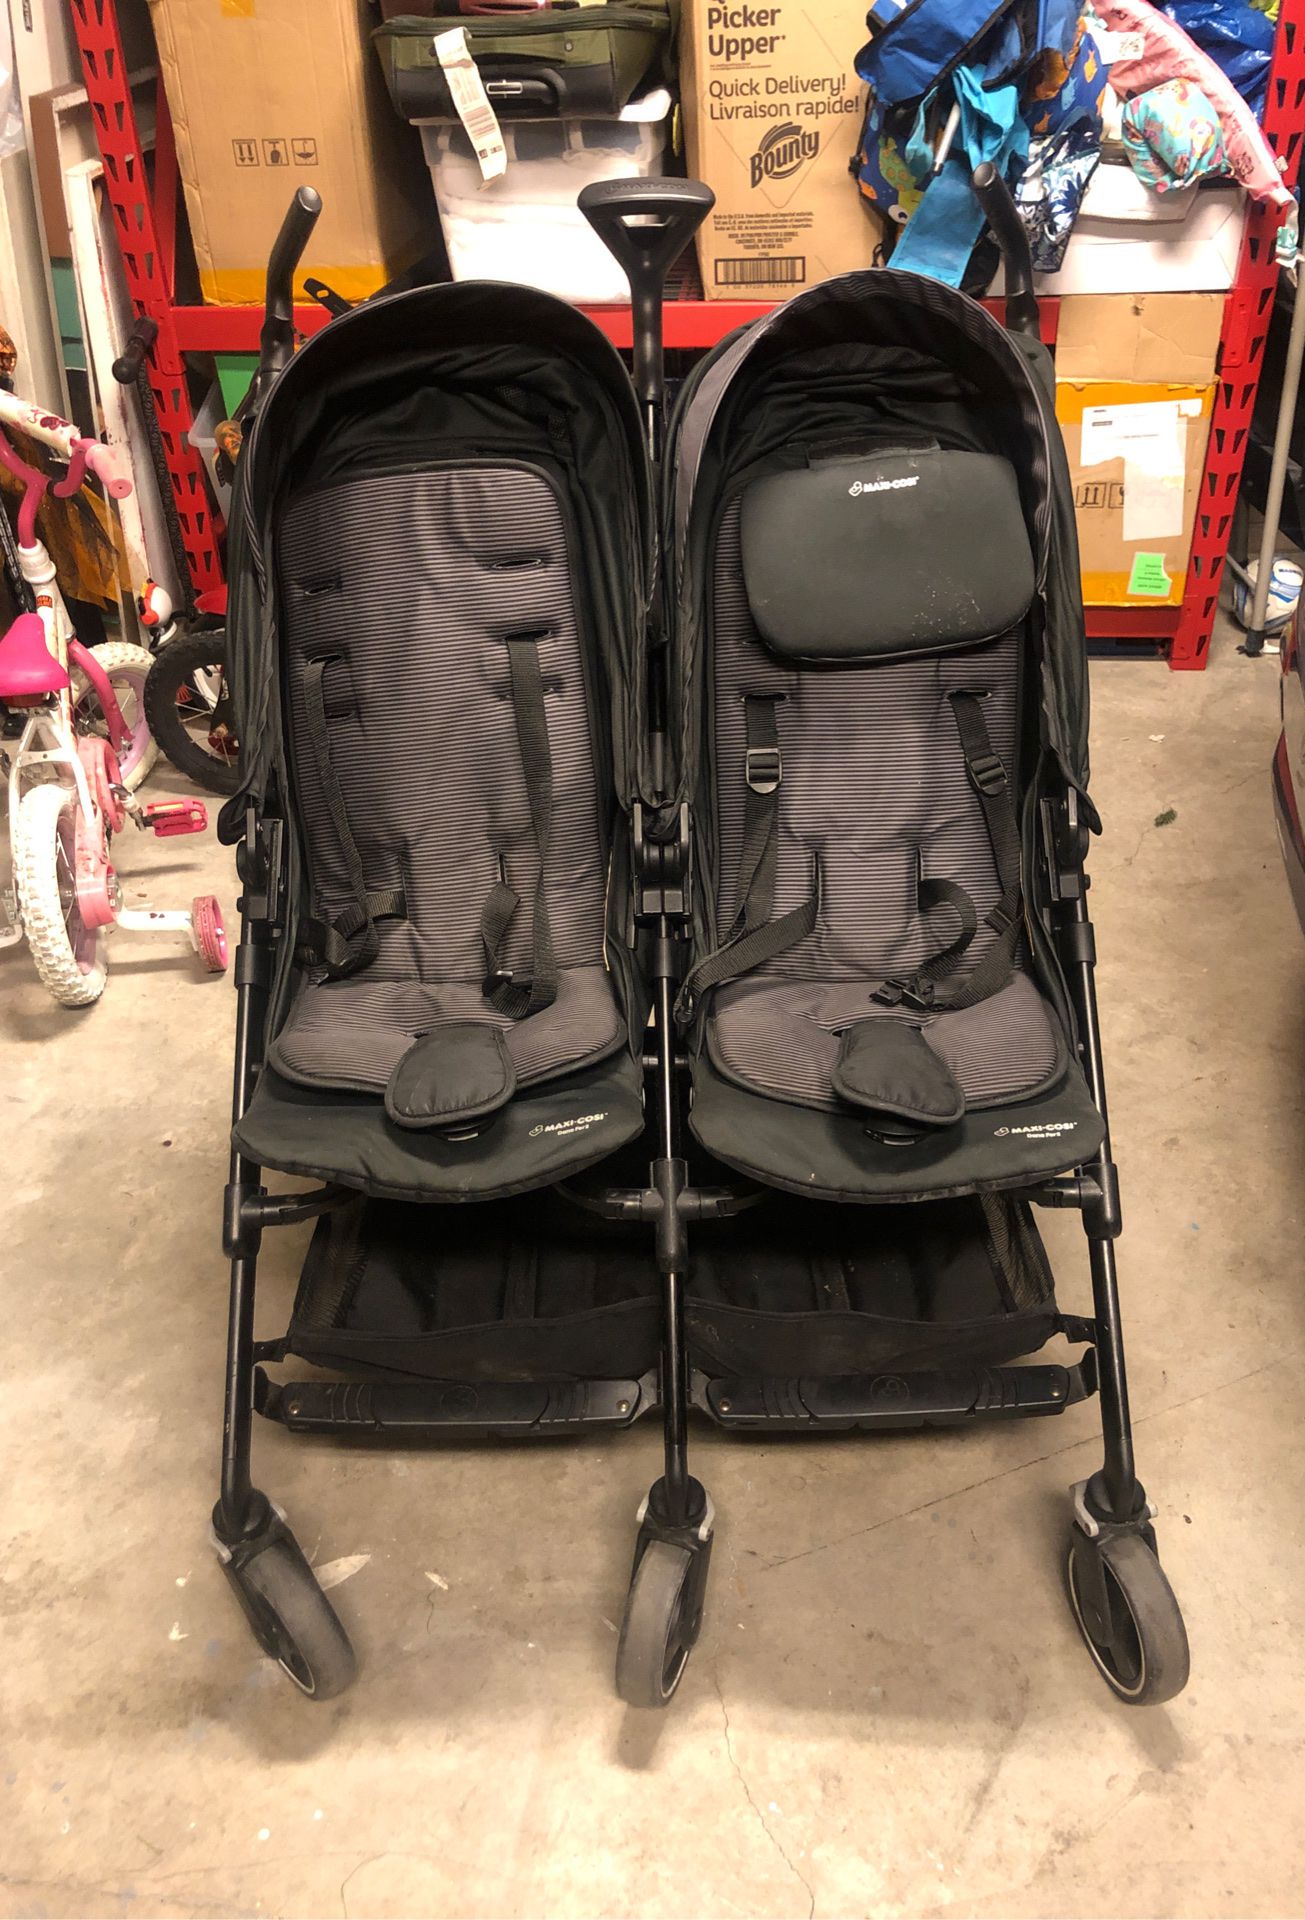 Maxi Cozy Double Stroller - Dana For2 (used)